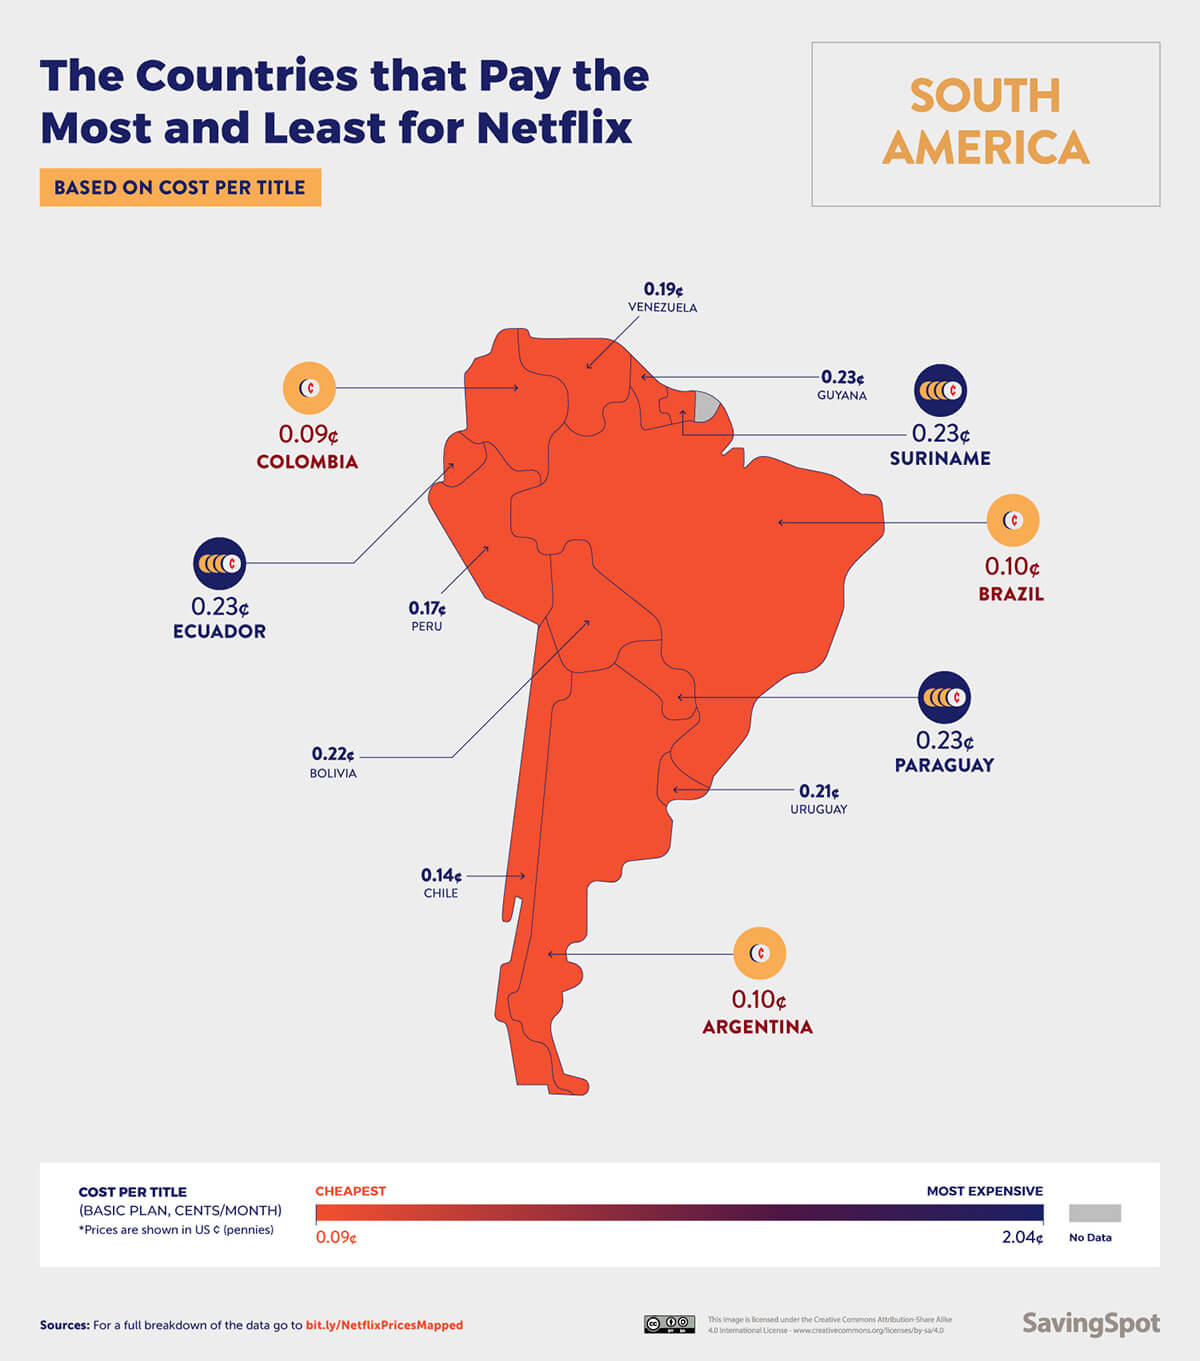 The Cost-per-title of Netflix in South America